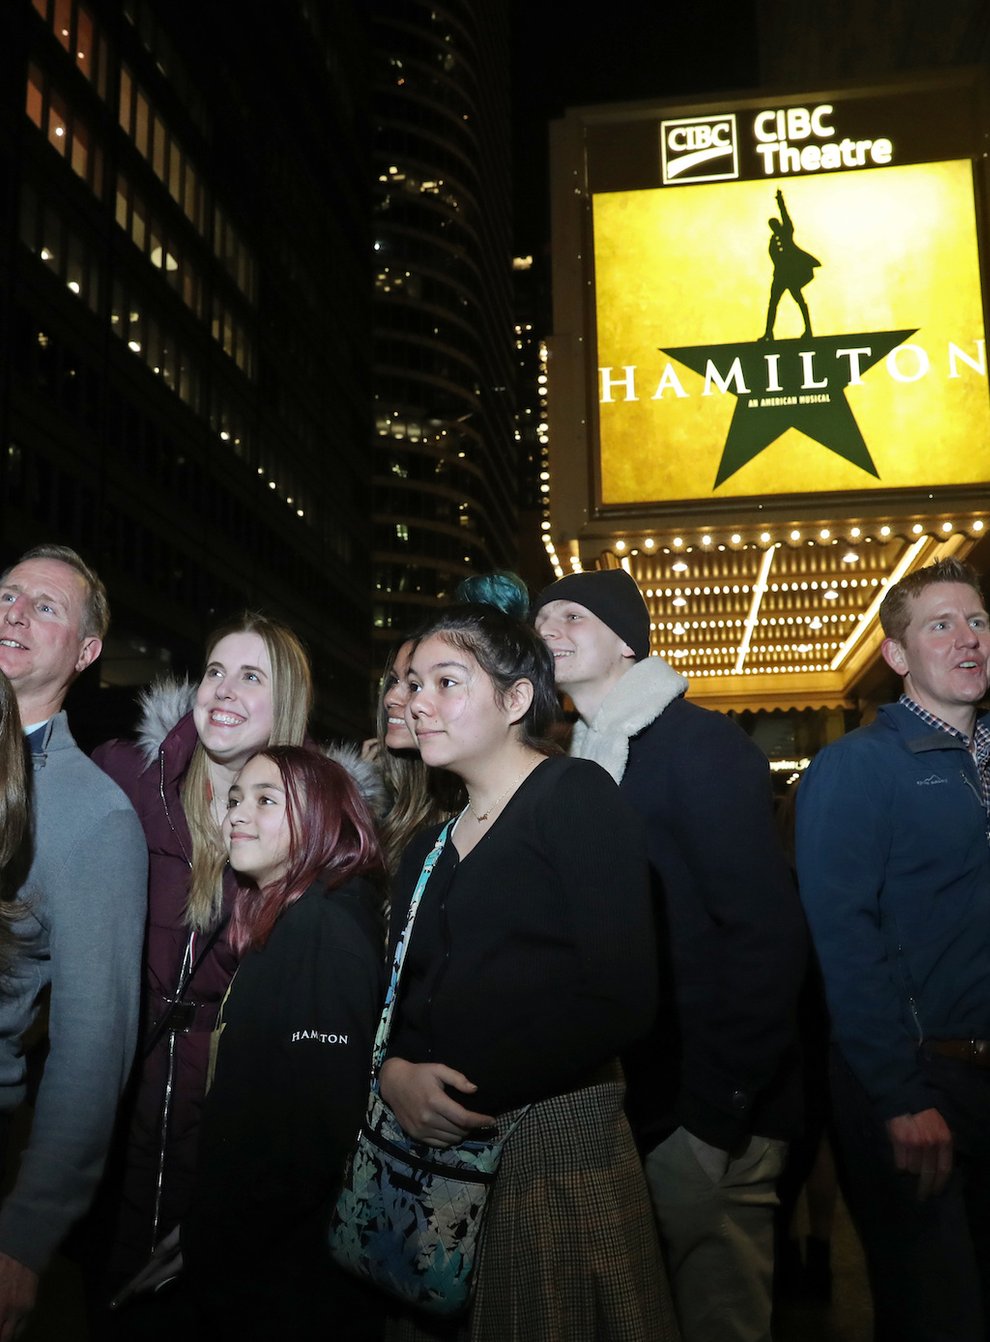 Hamilton first graced the Broadway stage back in 2015